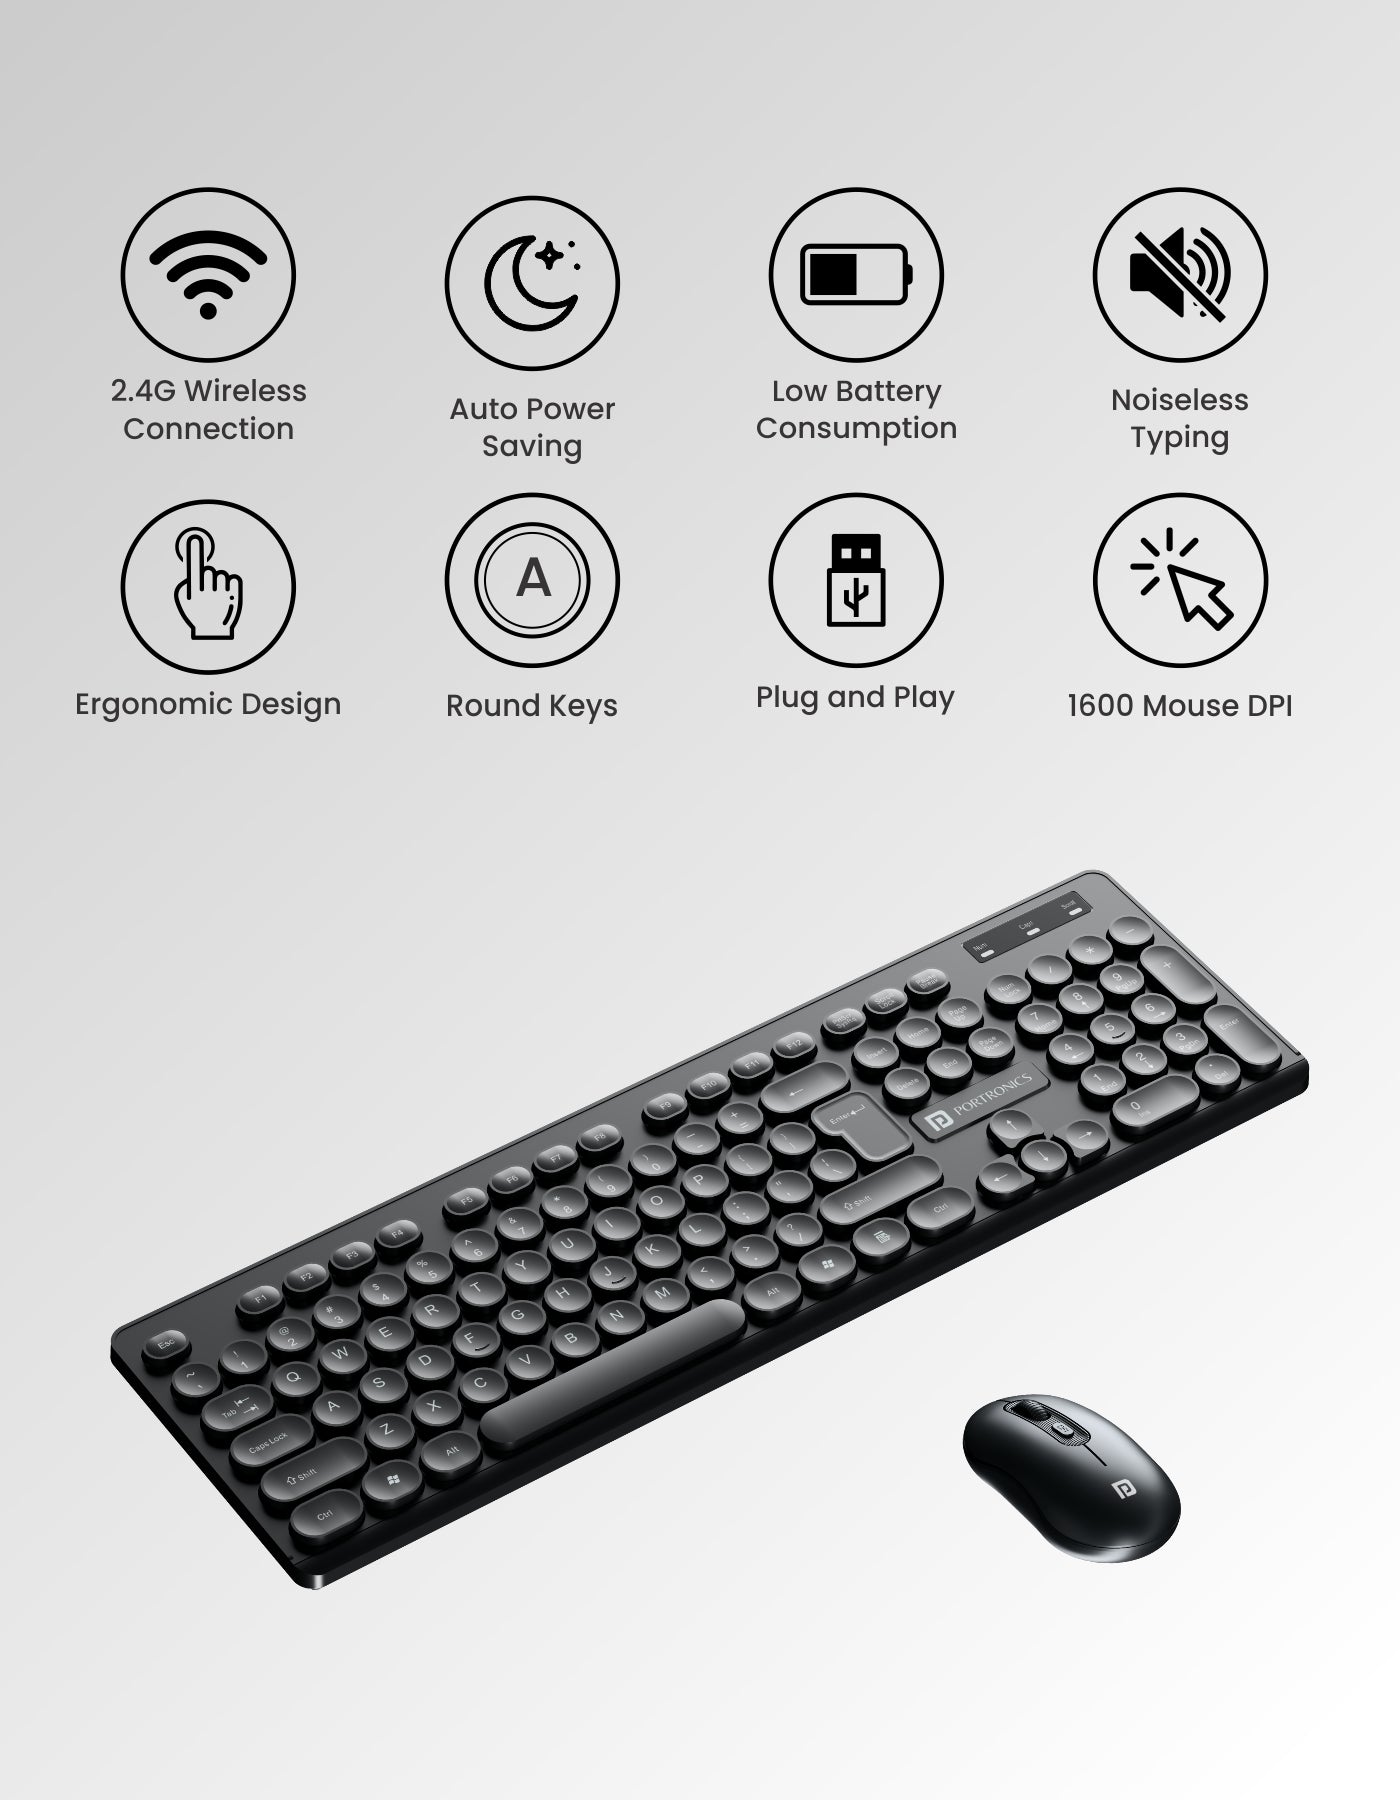 Portronics Key6  Wireless Mouse and Keyboard compact in size|  Wireless keyboard for desktop at online